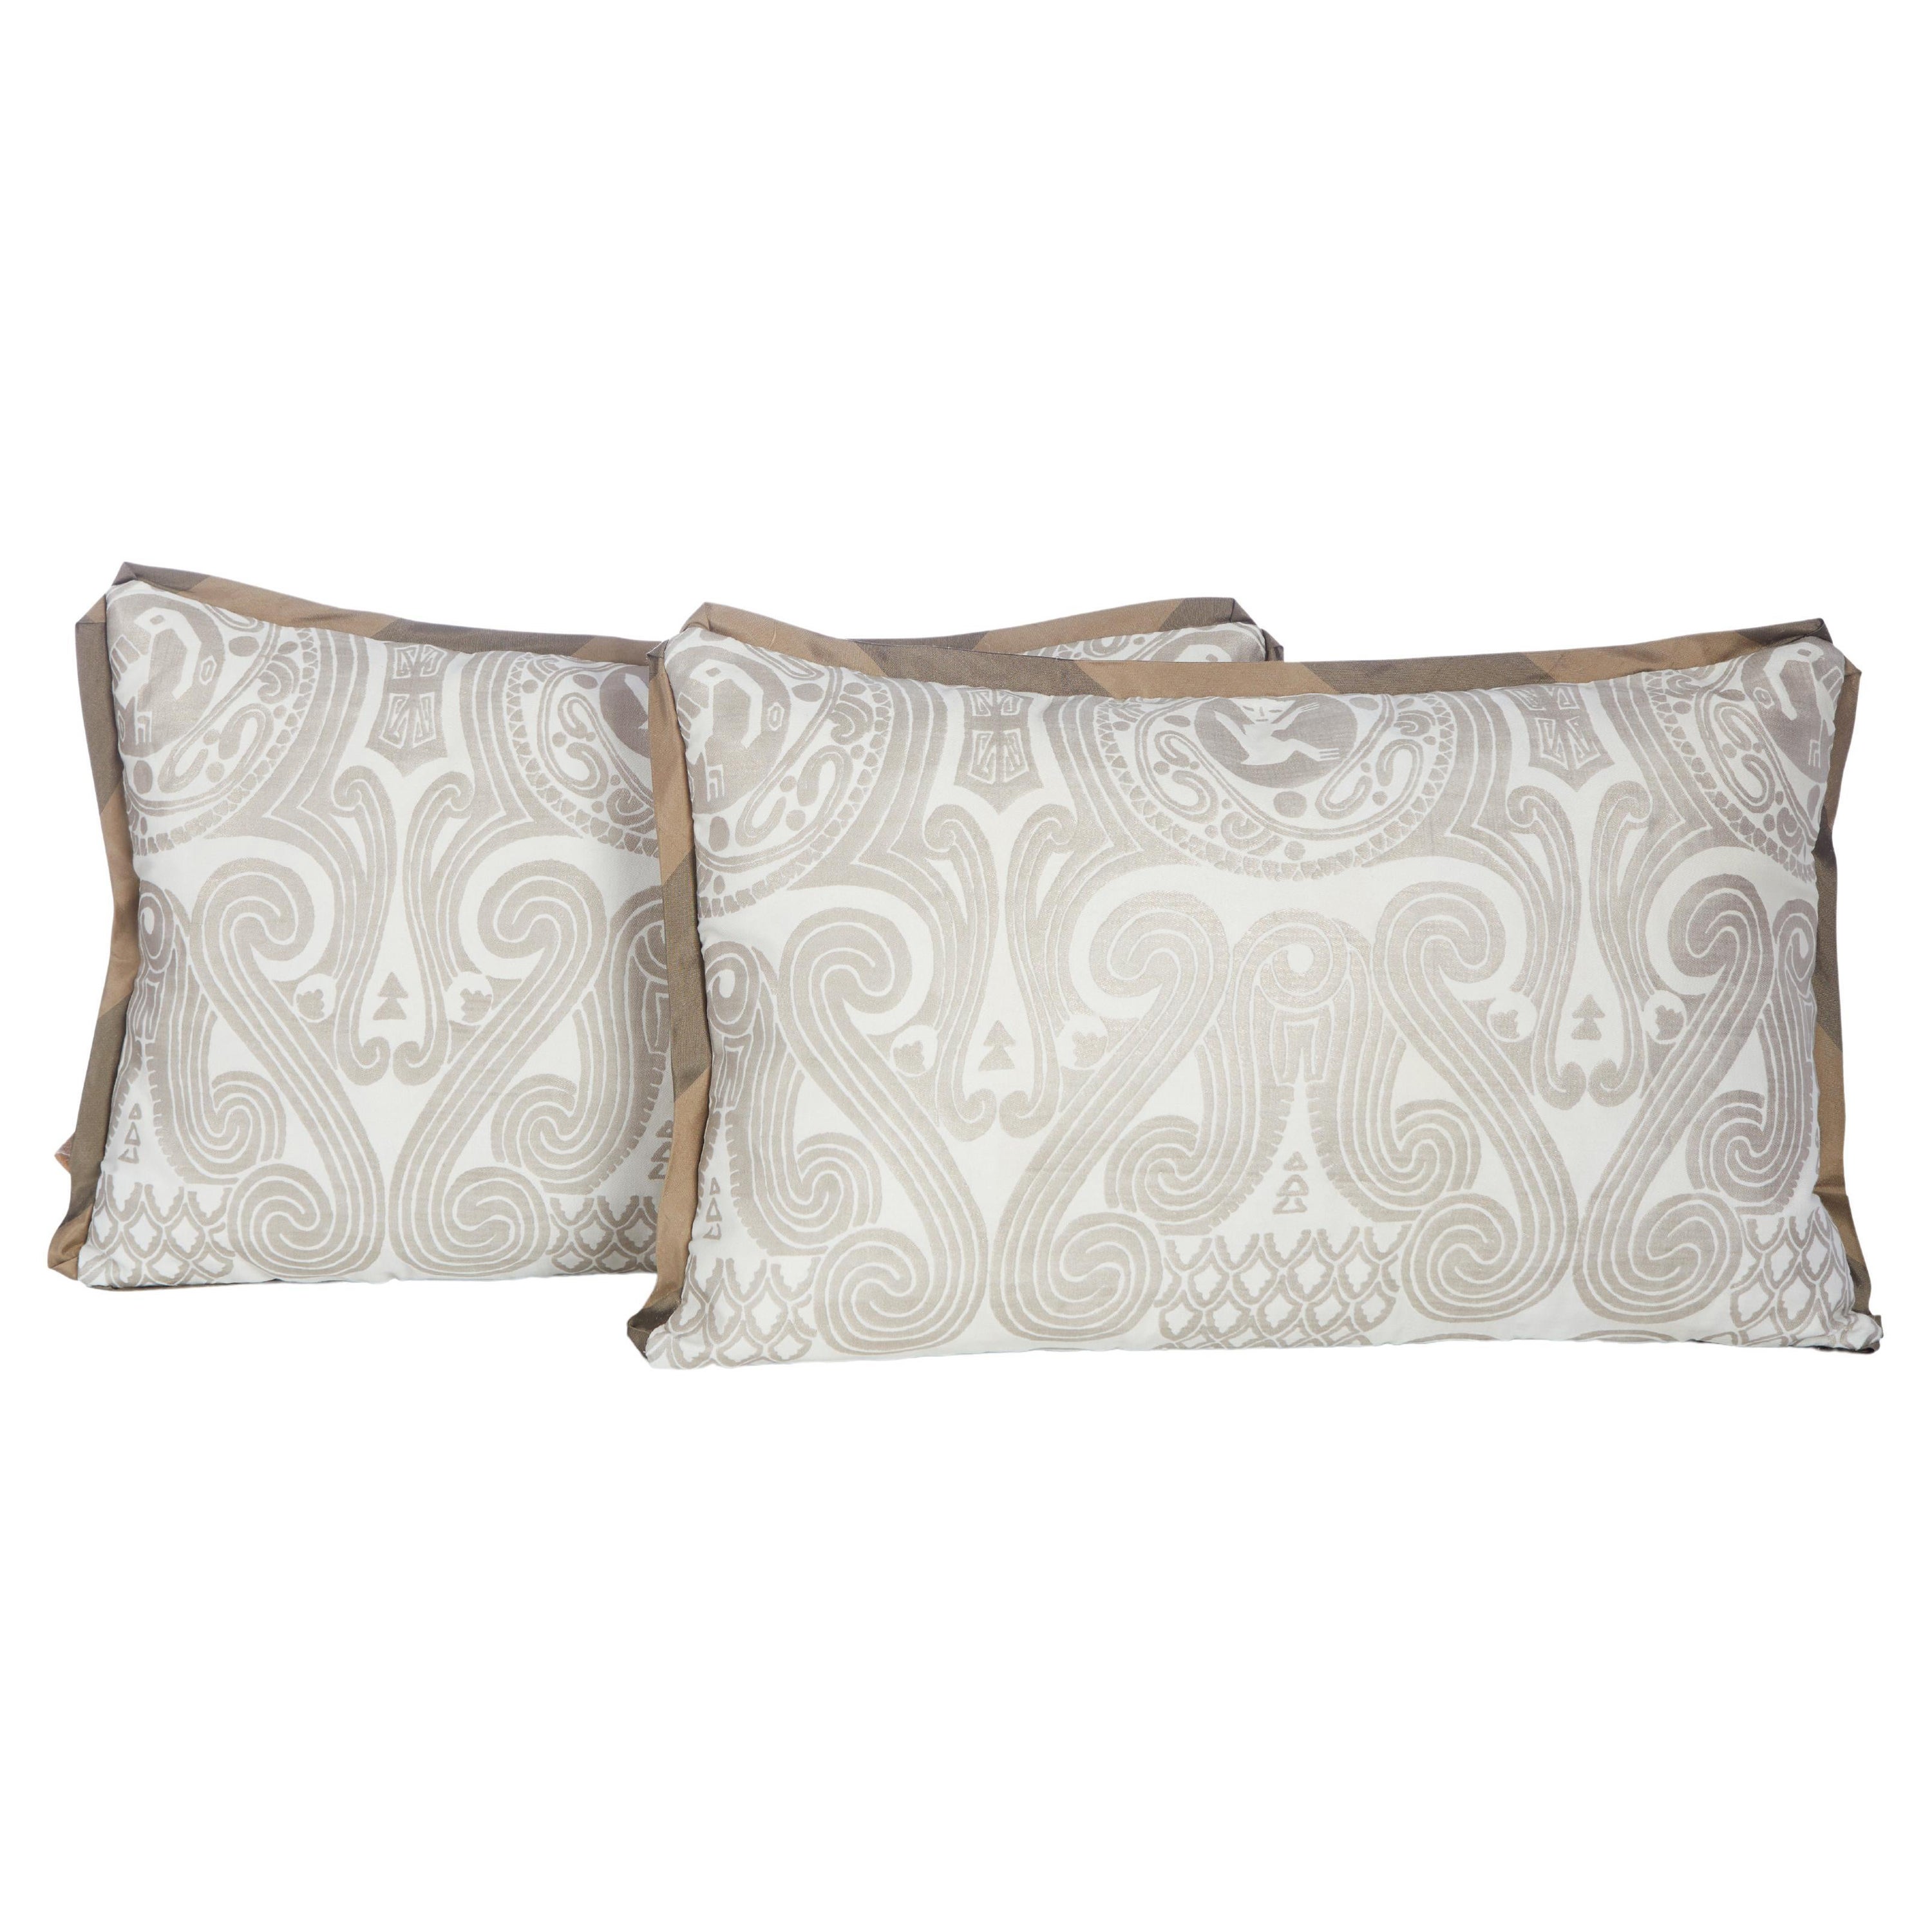 Pair of Fortuny Peruviano Lumbar Cushions In Silvery Gold on White For Sale